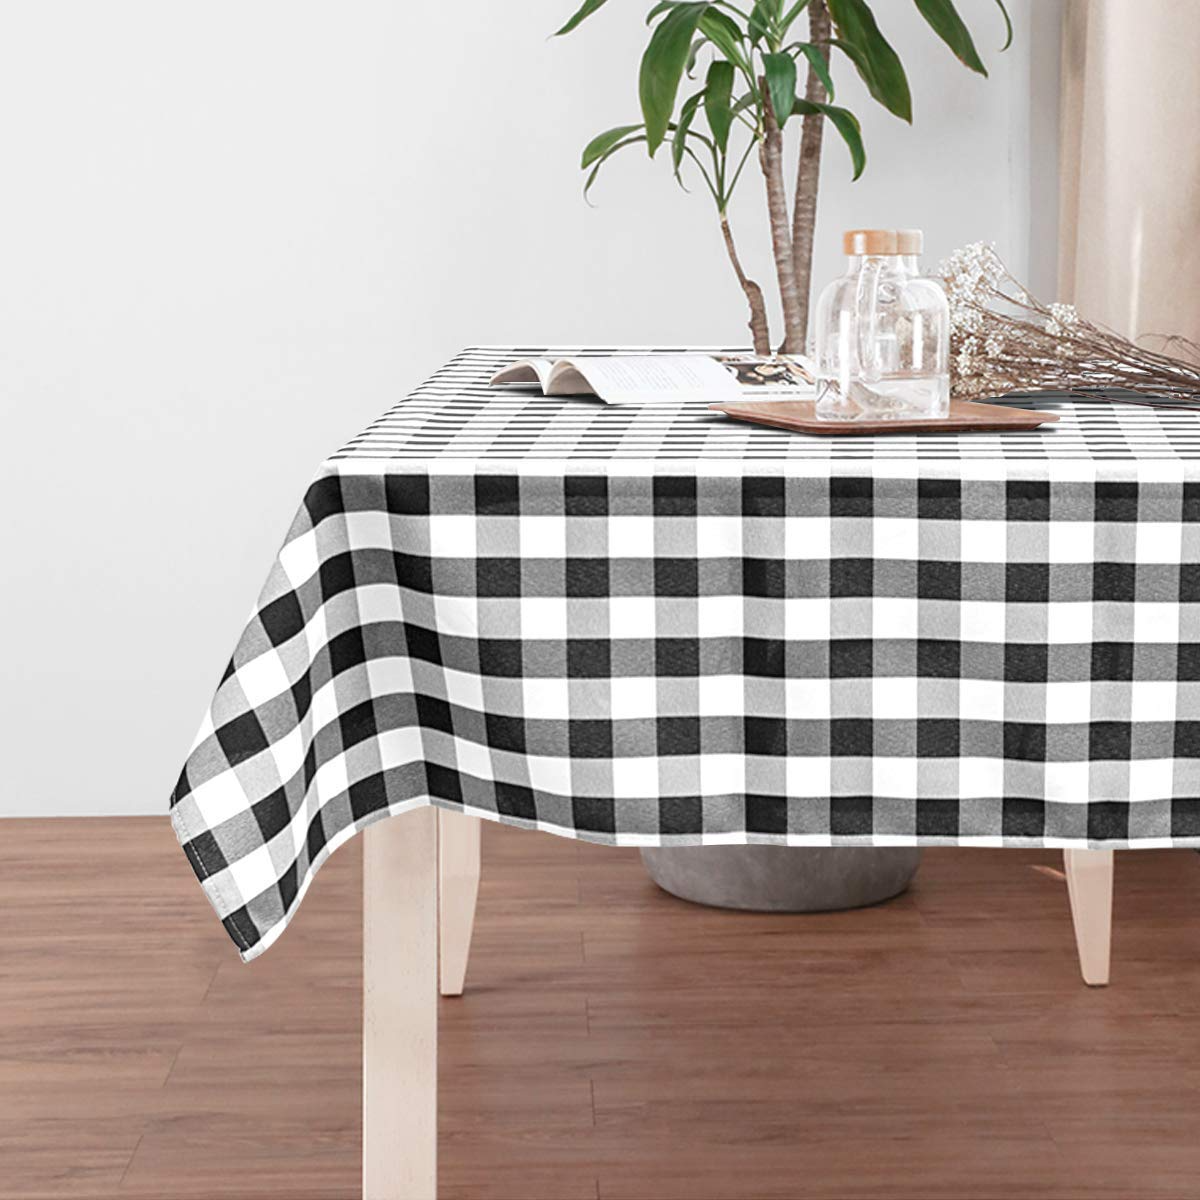 Giantex Decorative Buffalo Plaid Table Cover for Kitchen Dining Wedding Party